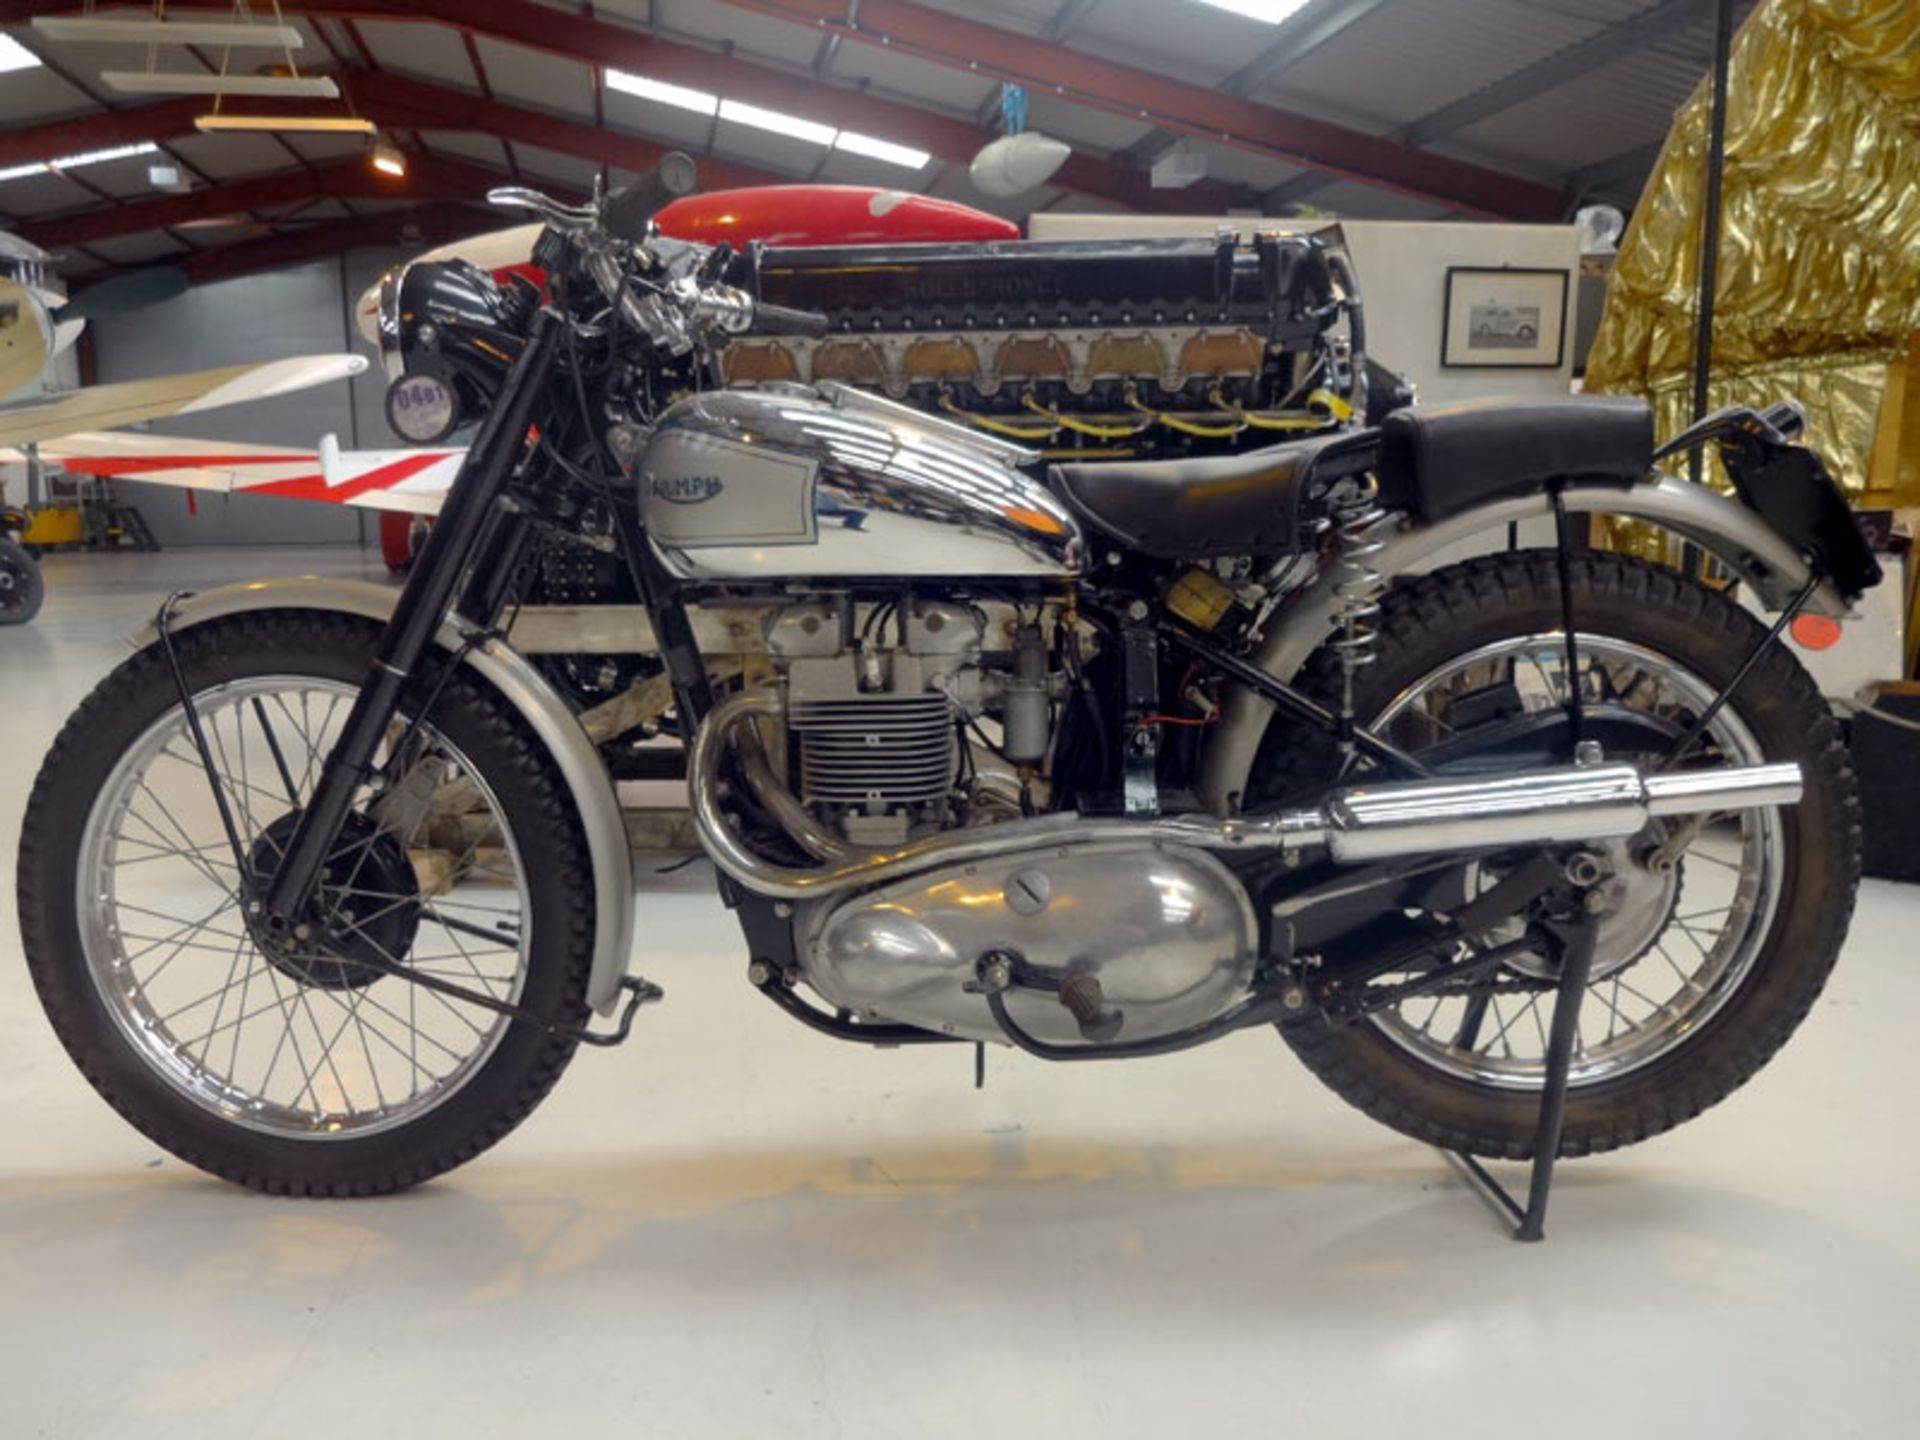 - Part of a private collection

- Restored bike

- Comes with V5 and ownership history